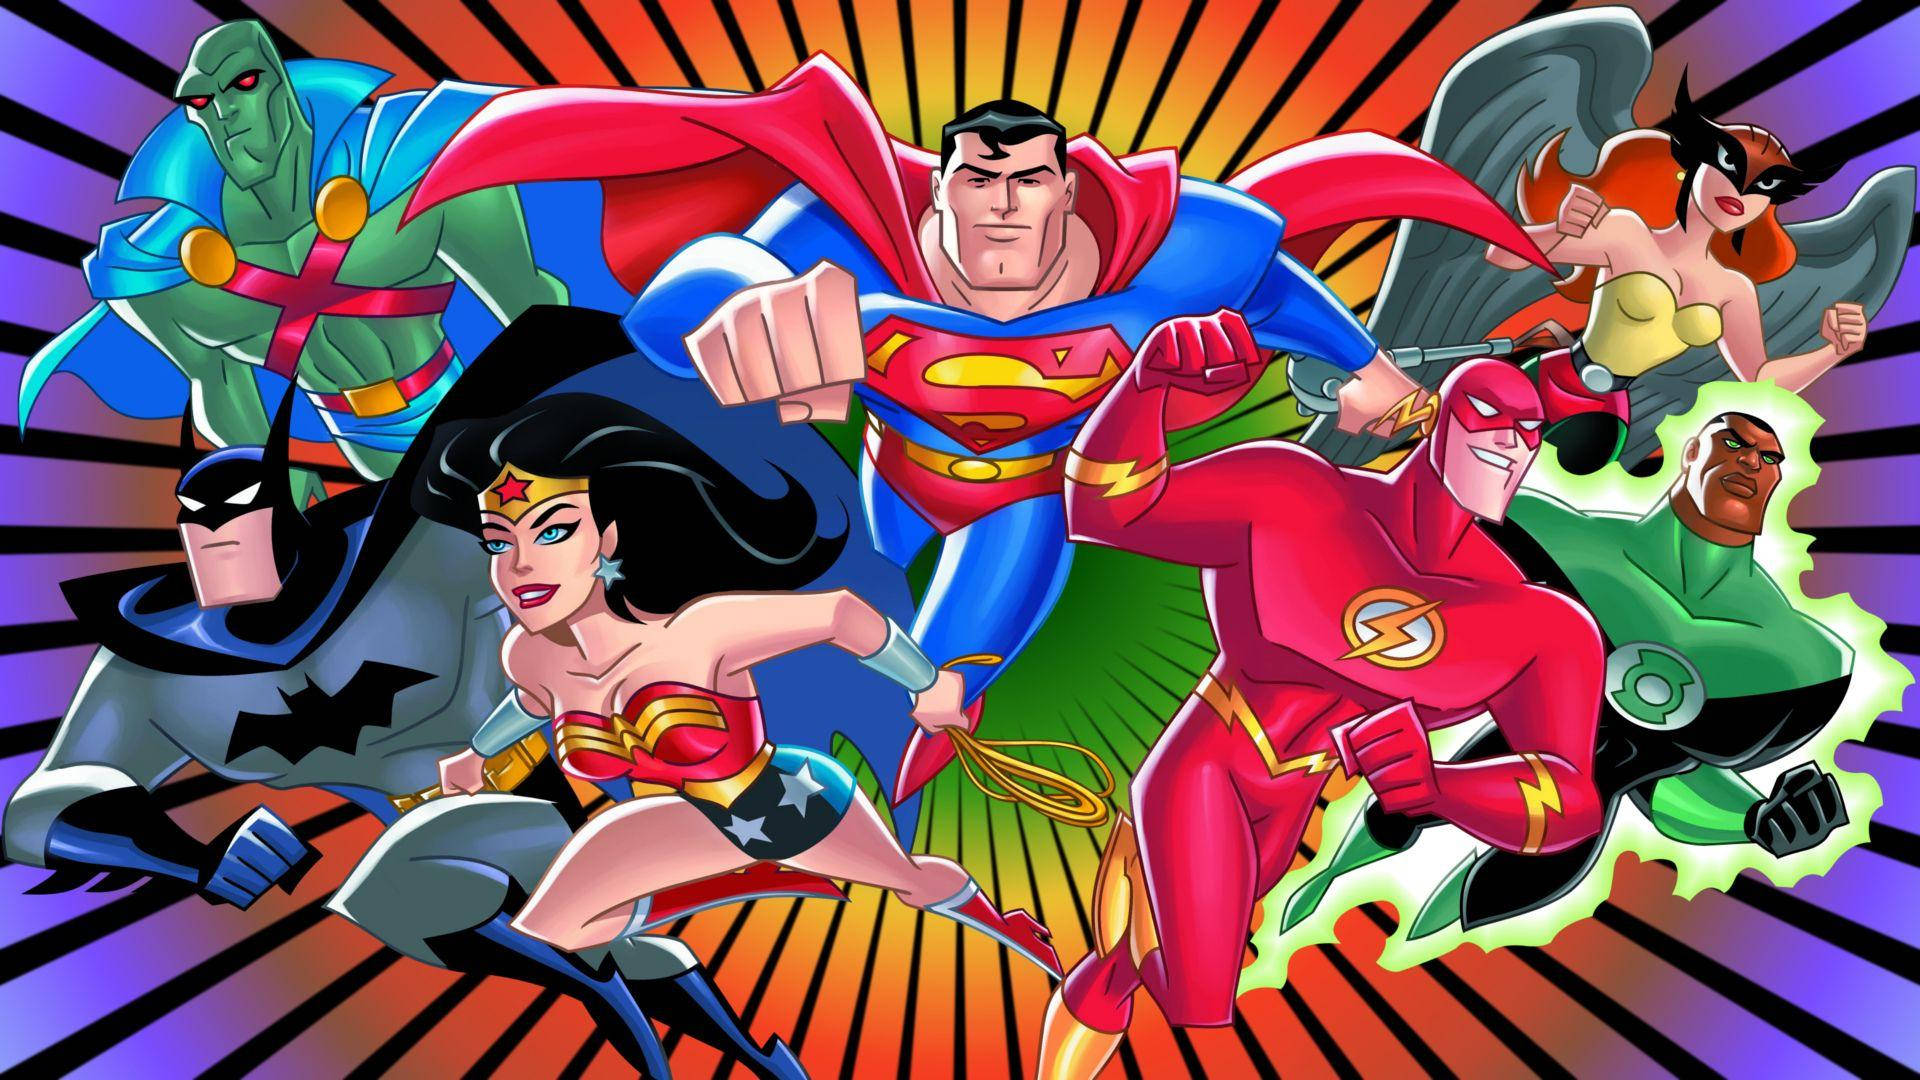 The Unstoppable Heroes Of Justice League Wallpaper